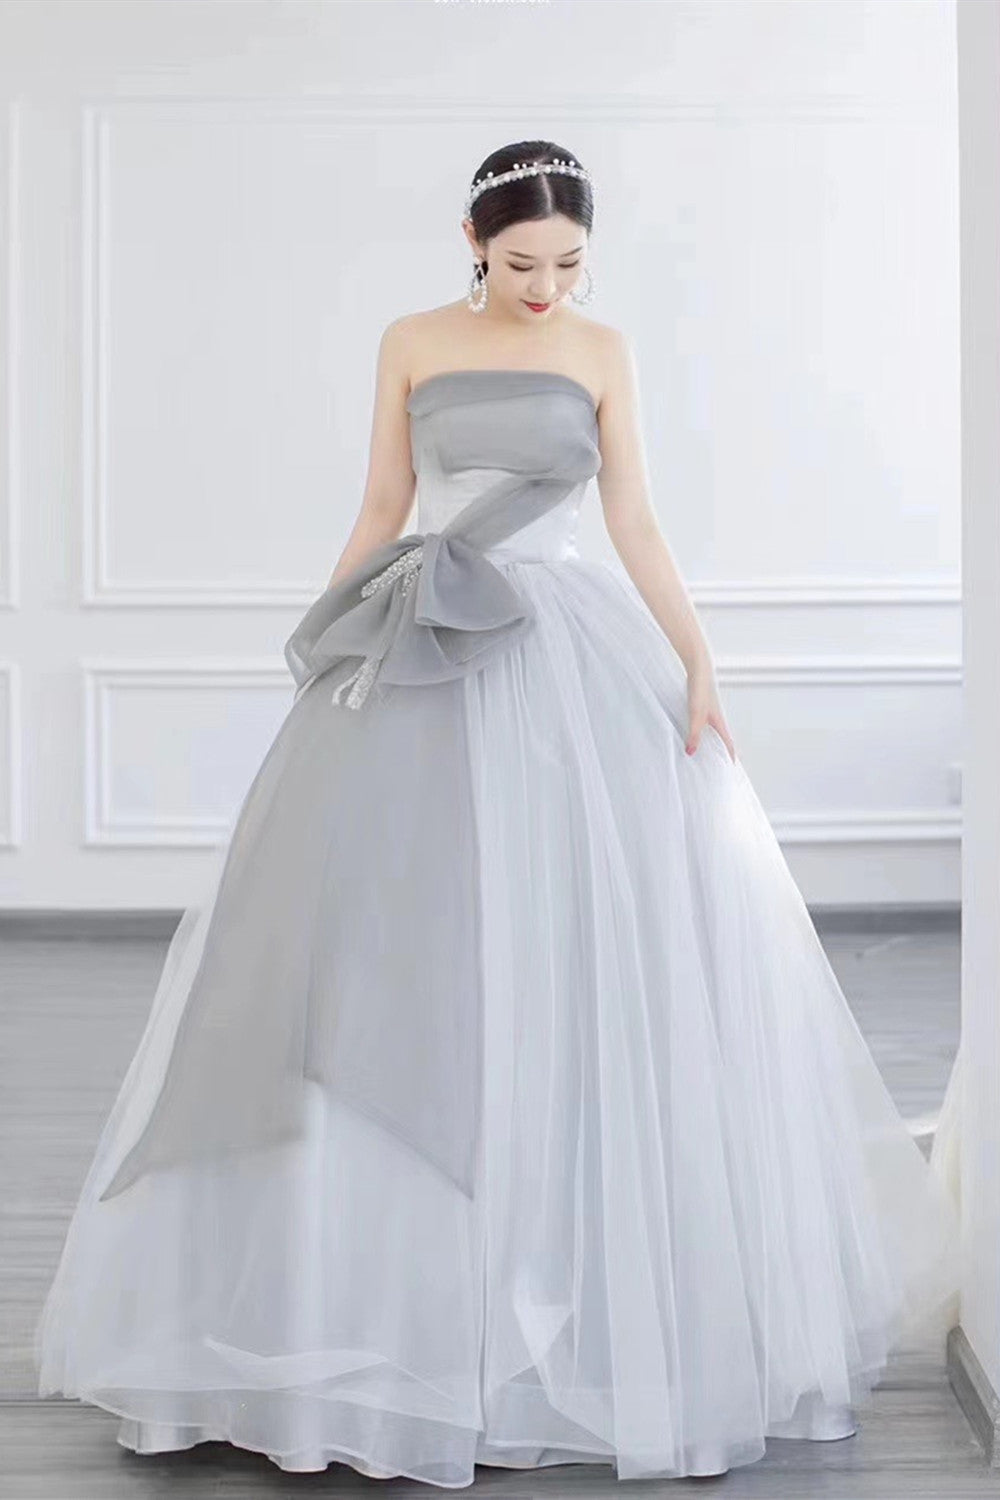 Strapless Newest A Line Wedding Dresses, 2021 Popular Bridal Gowns, Tulle Wedding Dresses